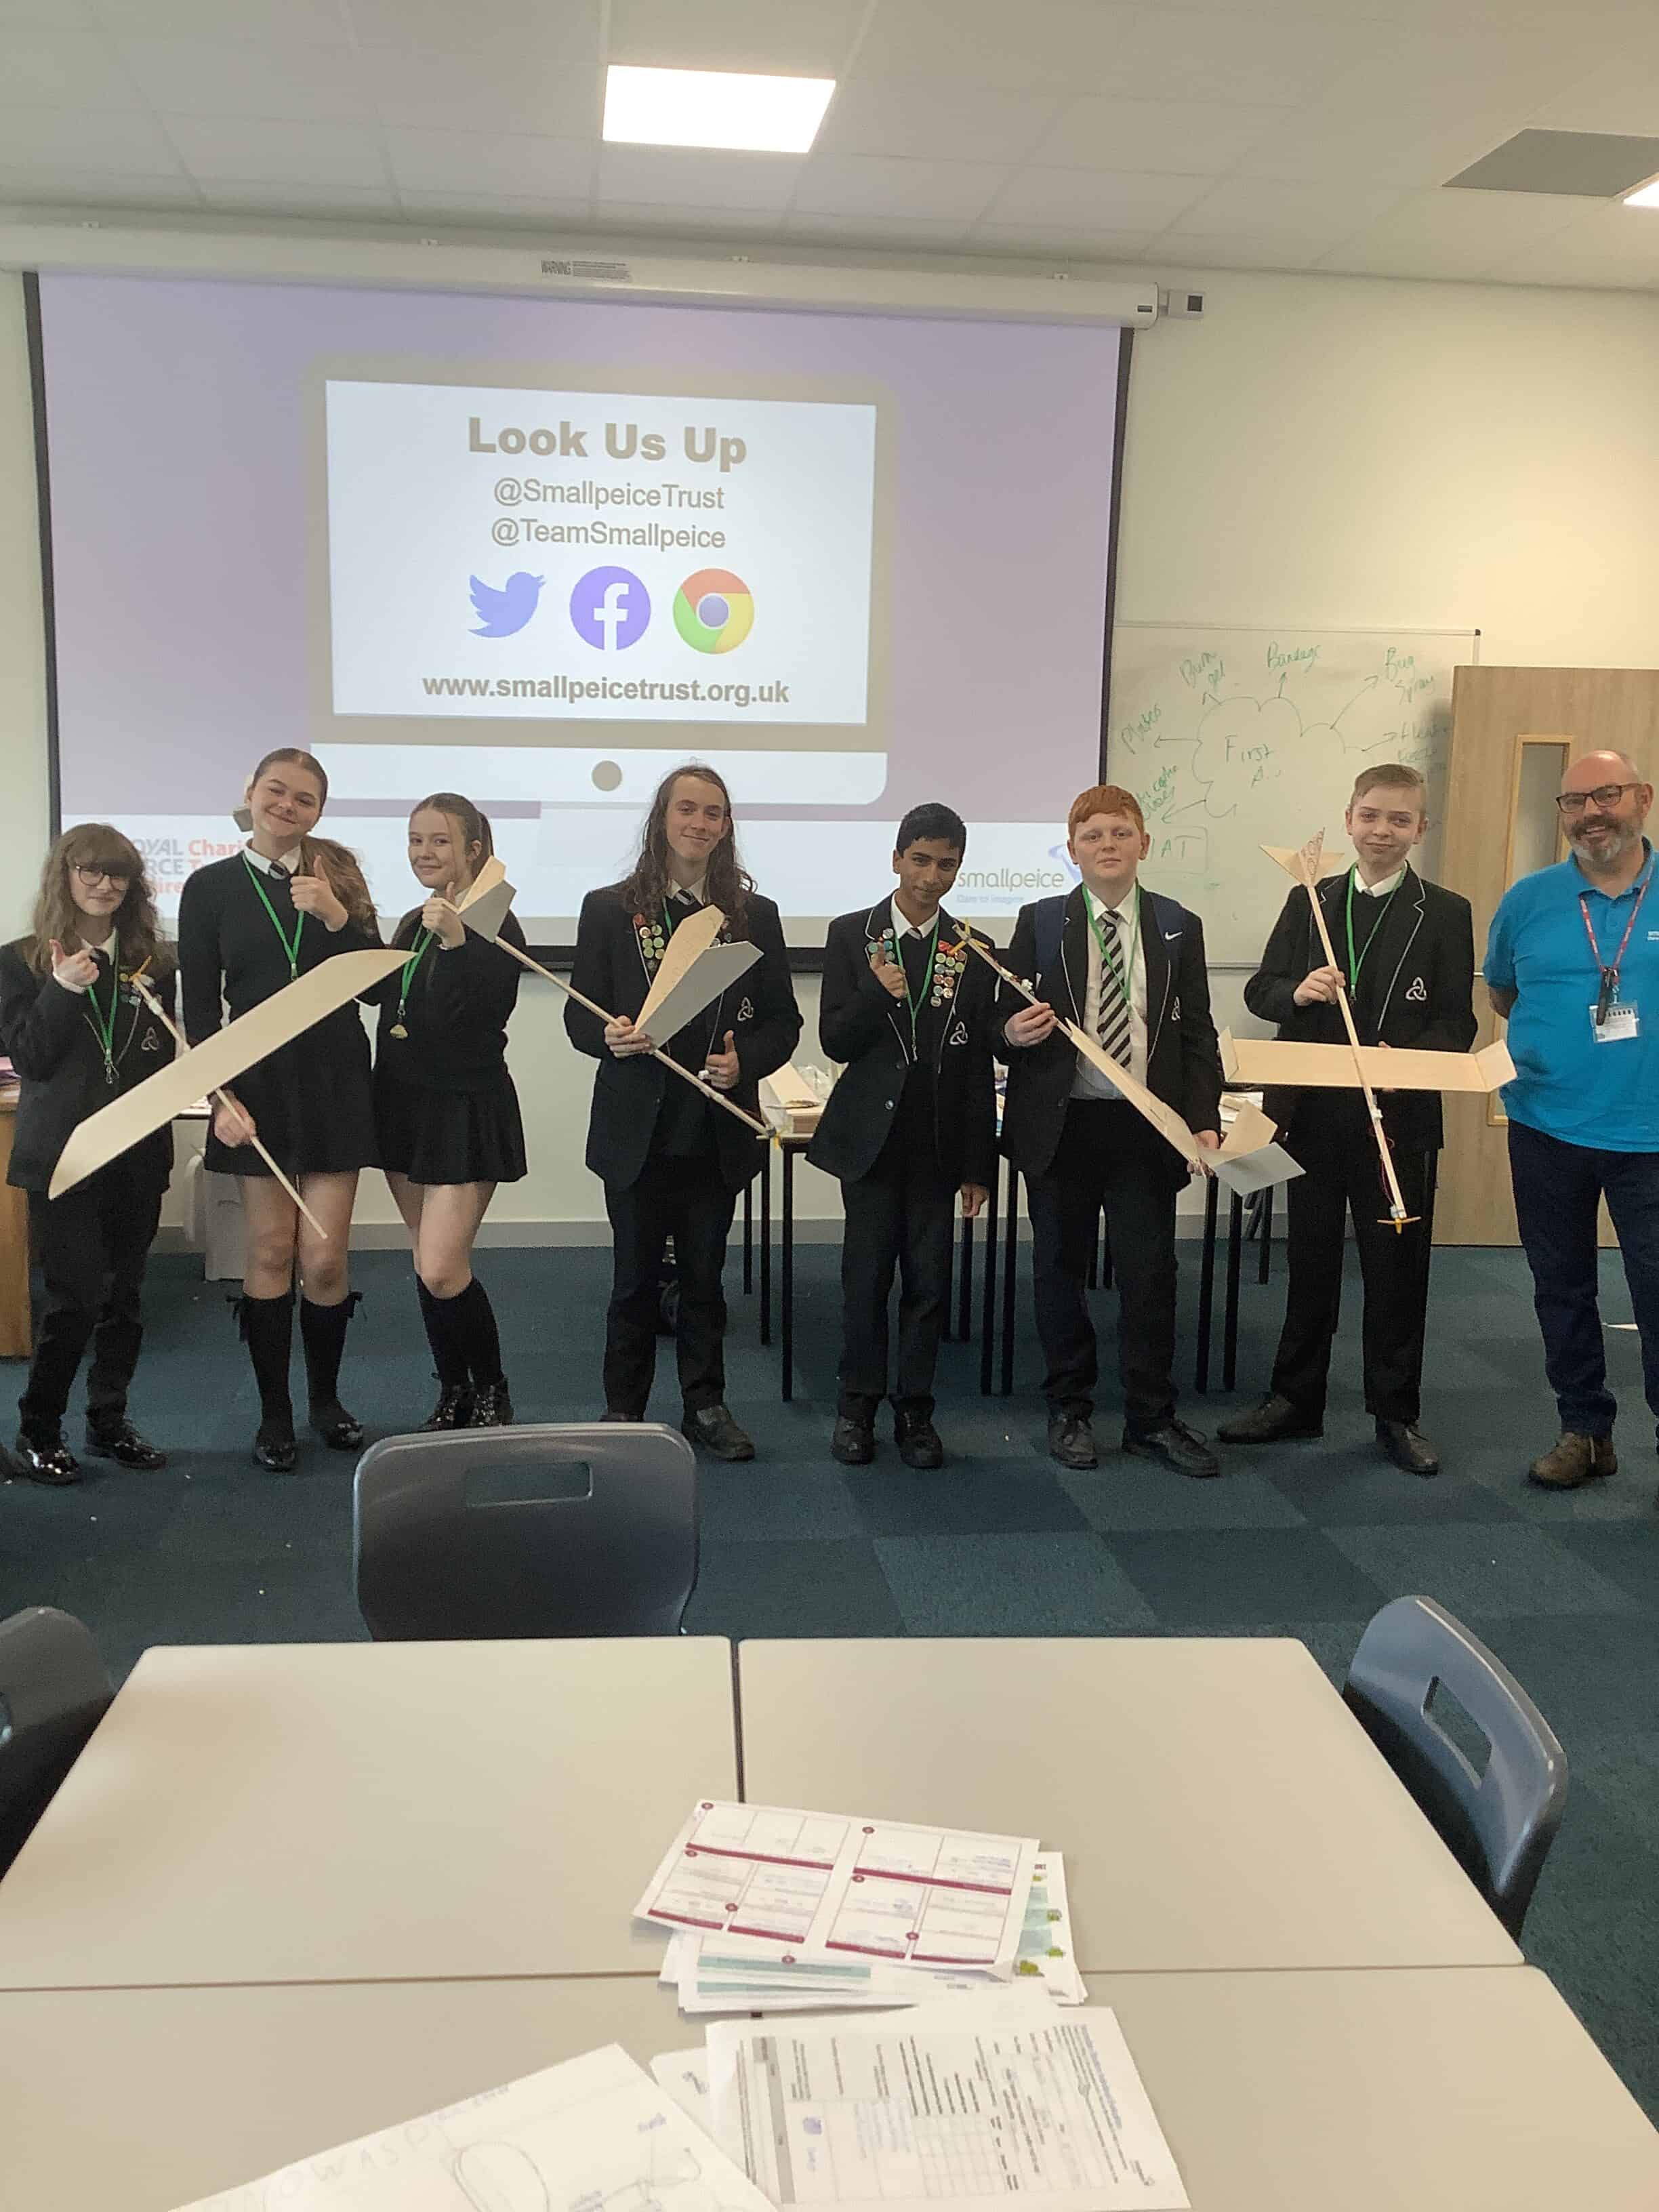 Students from Laurus Ryecroft stand in a classroom holding the airplanes they crafted as part of the Road to RIAT: Blast Off! STEM challenge day with the Smallpeice Trust.